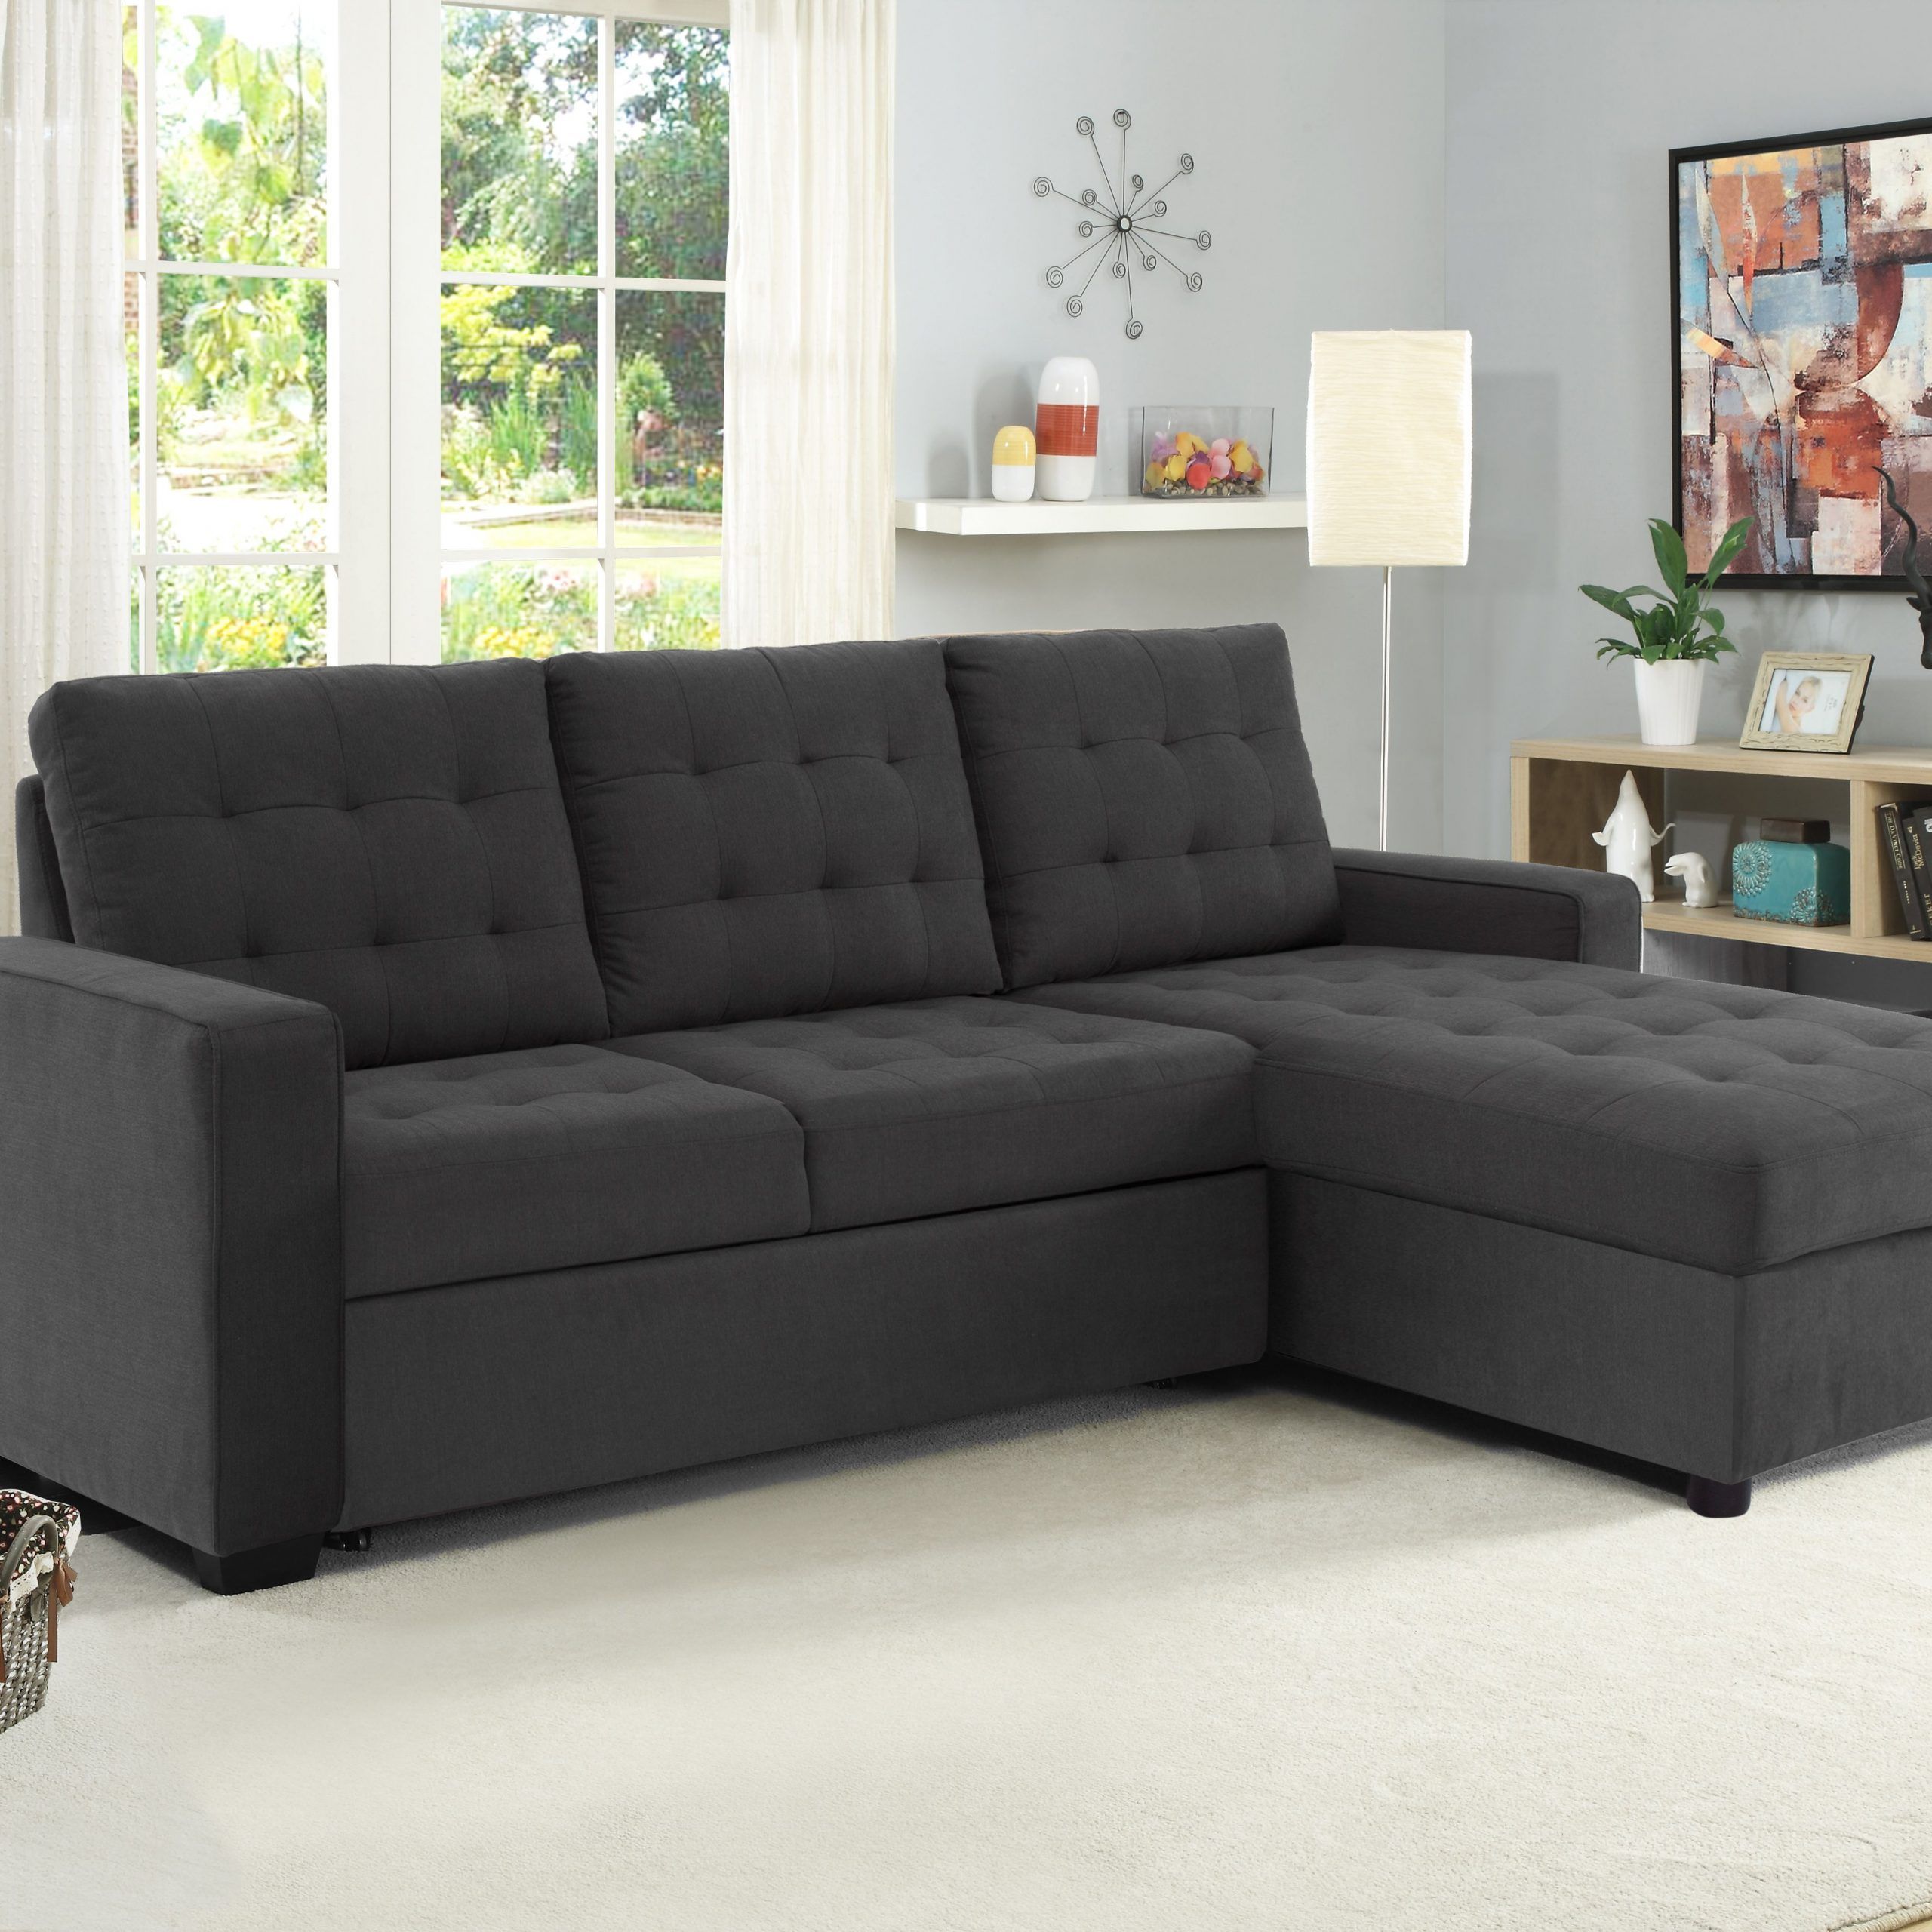 Buy Serta Bostal Sectional Sofa Convertible: Converts Into With Live It Cozy Sectional Sofa Beds With Storage (View 2 of 15)